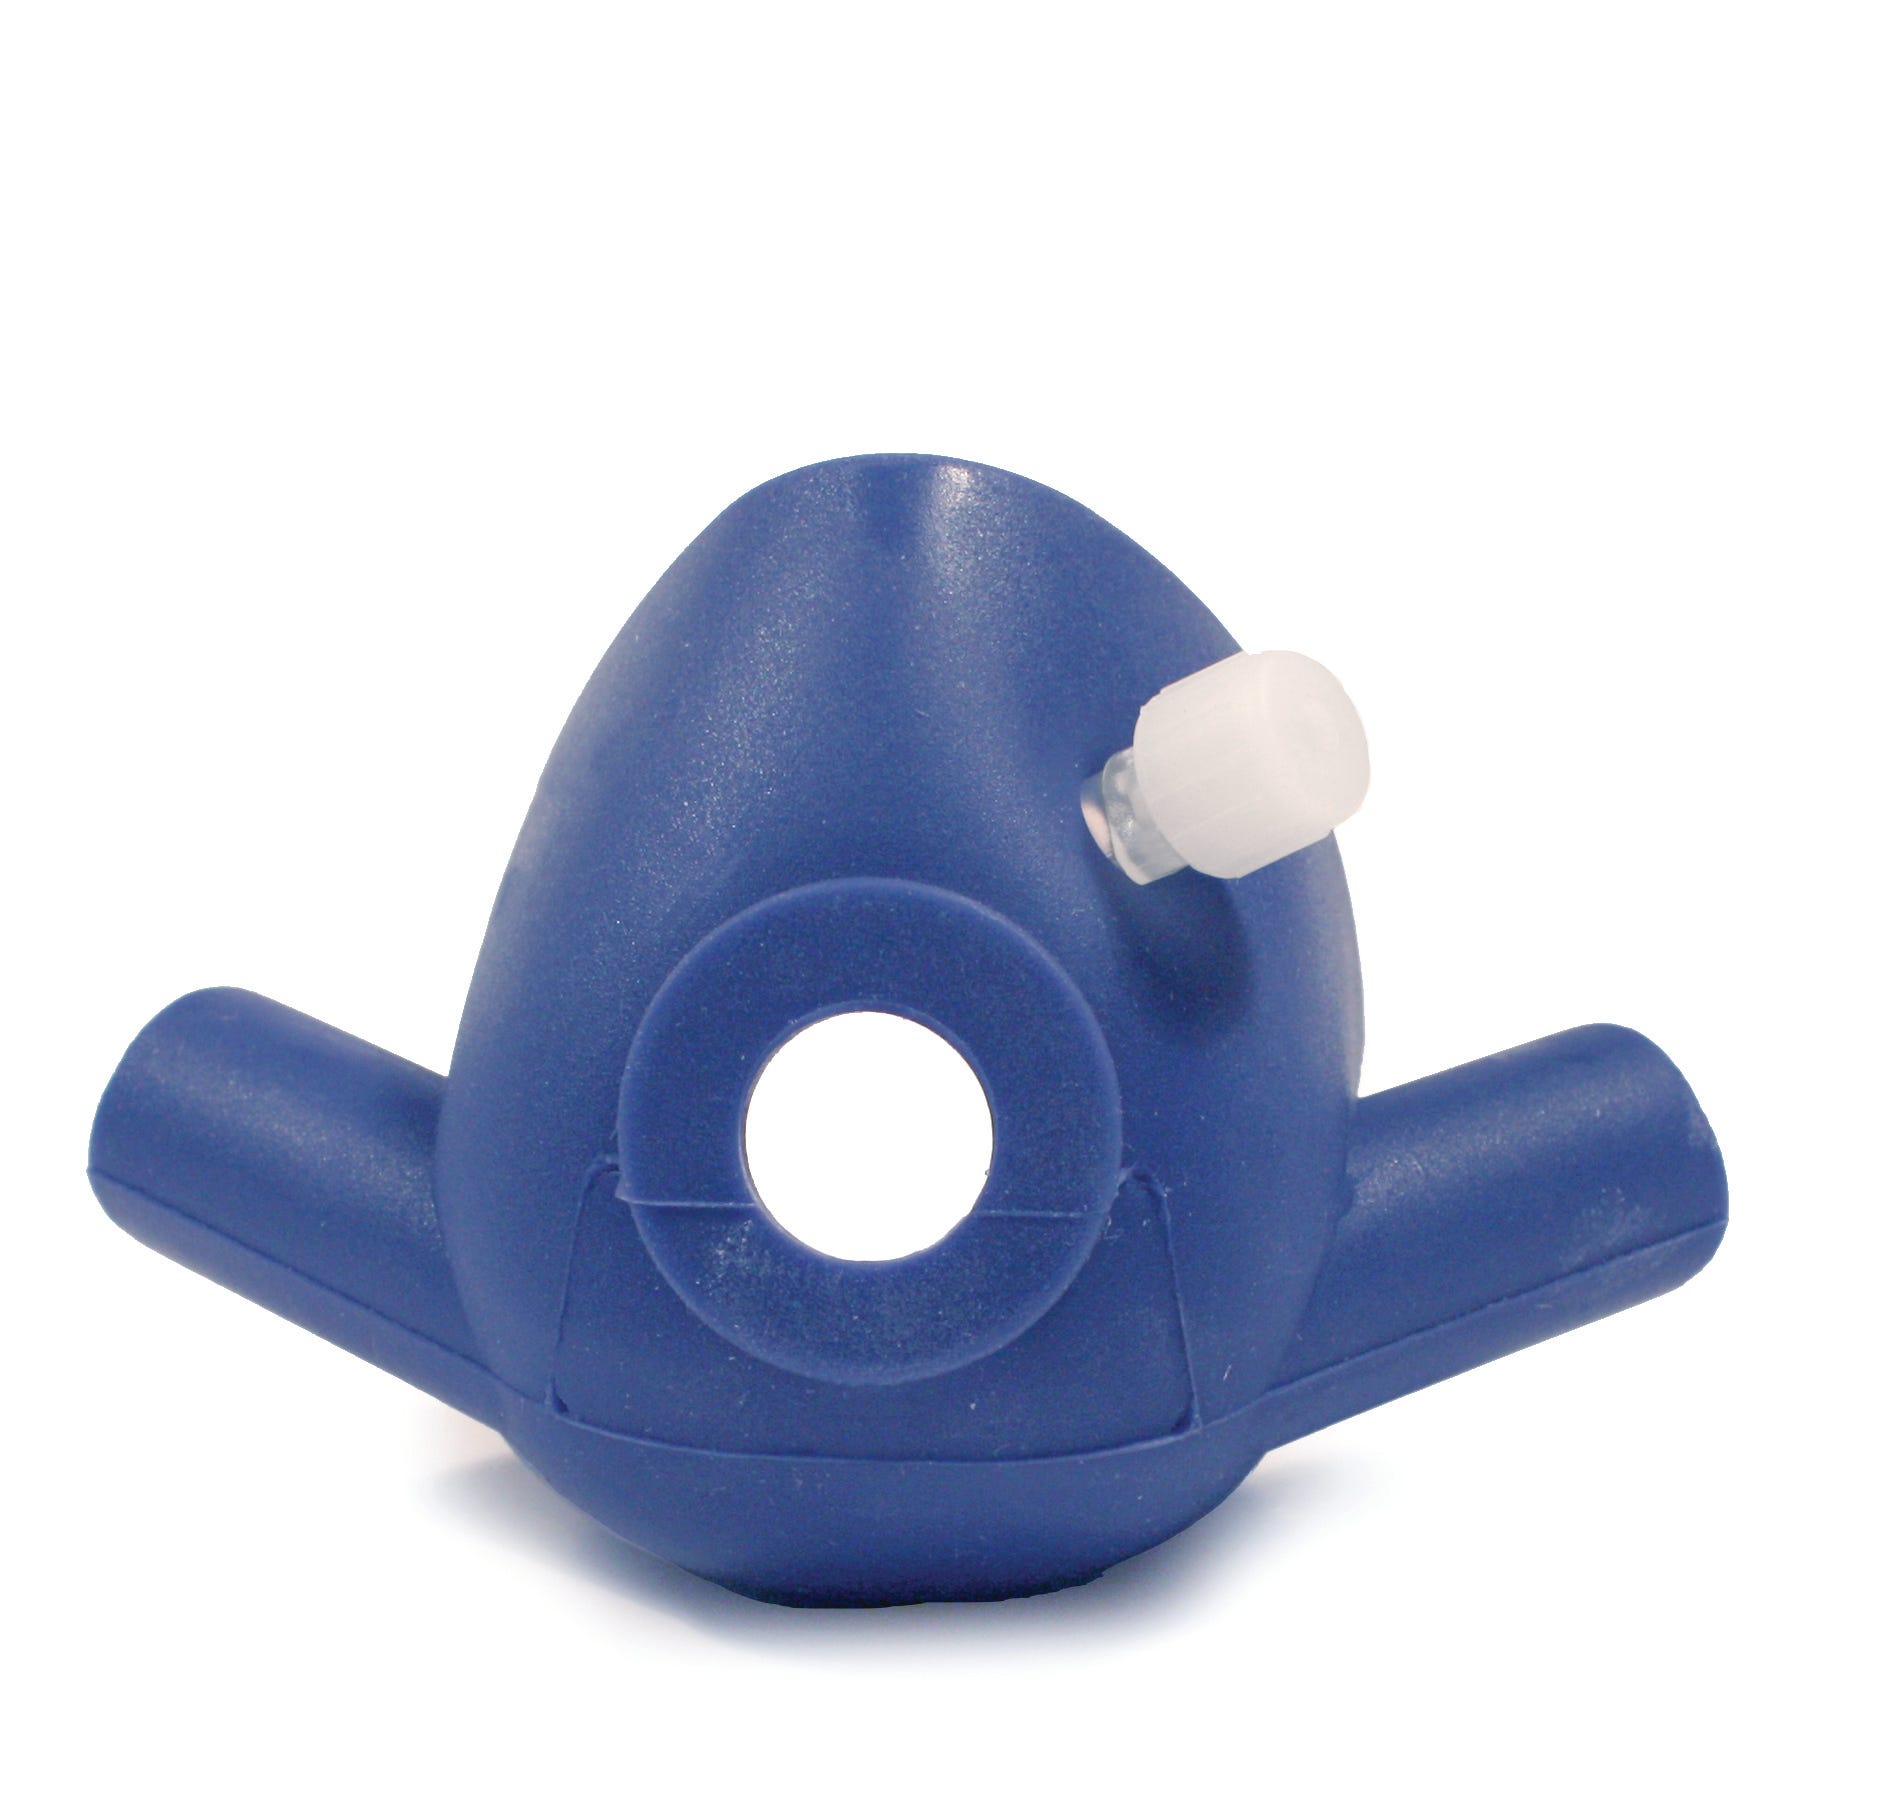 Prepunched Autoclavable Nasal Hoods with Luer Lock Connection, Blue, Medium, 3/Pkg